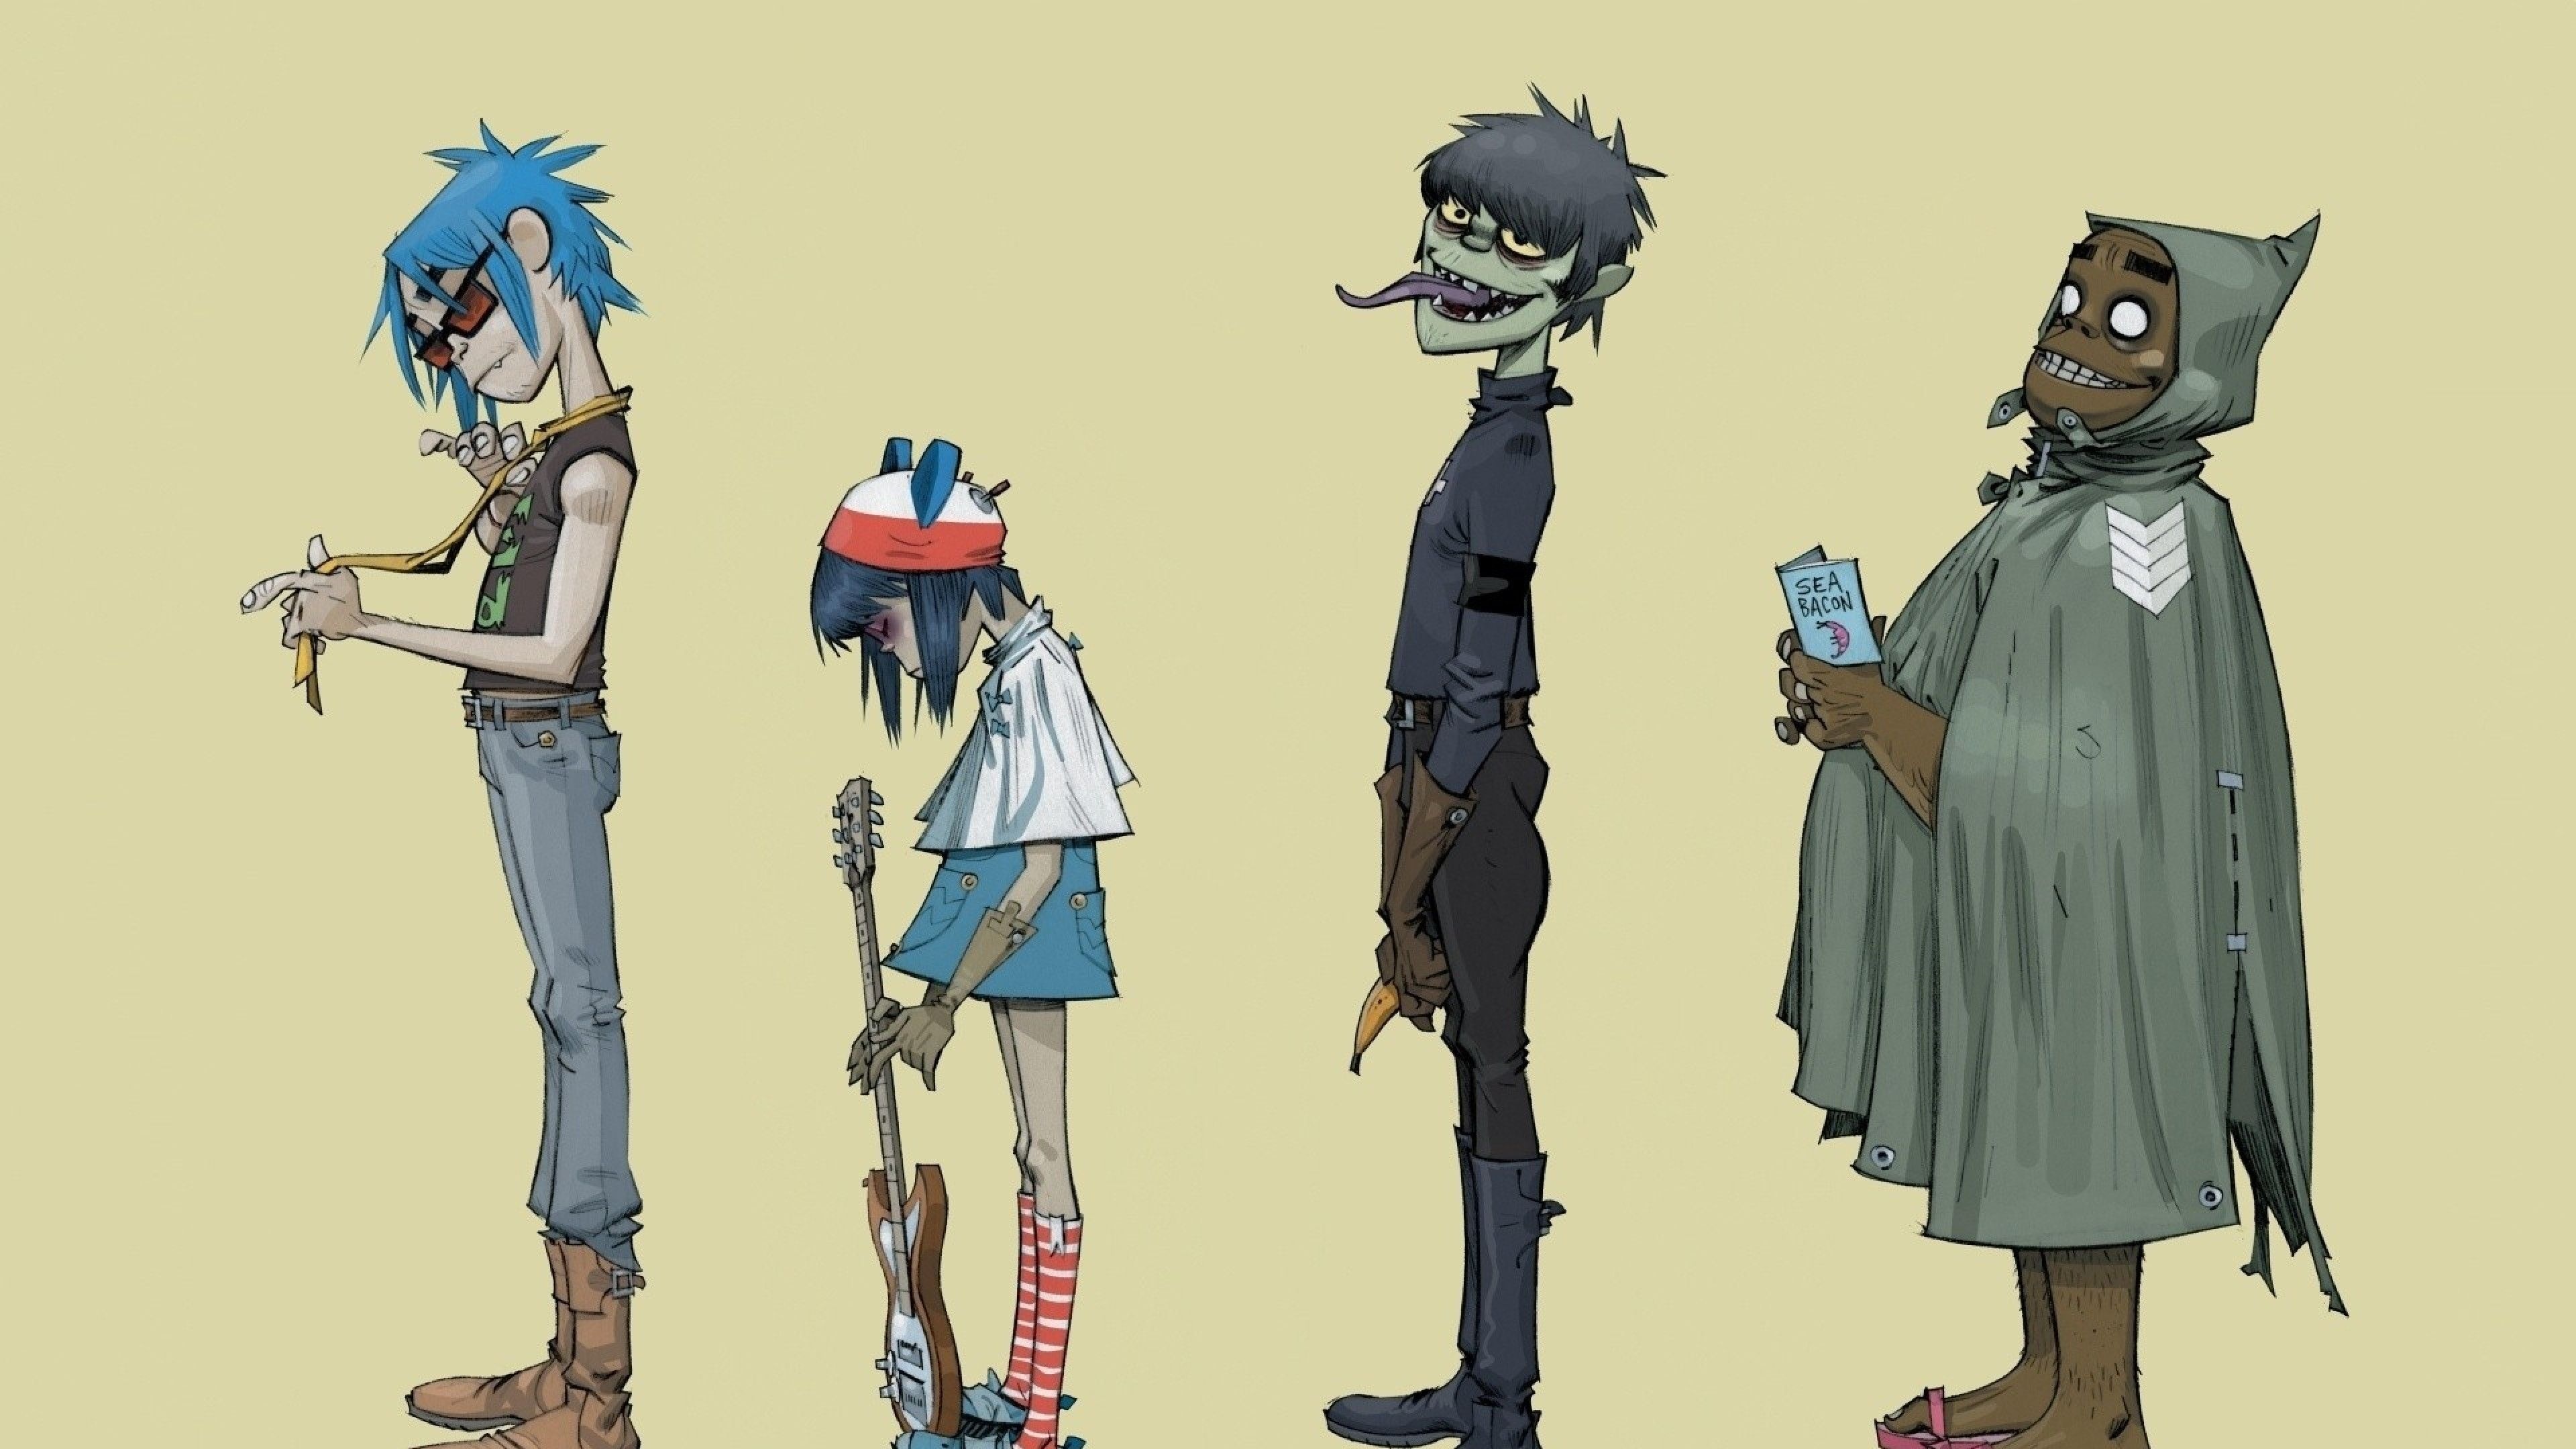 Gorillaz: An English virtual band formed, The members: Russel Hobbs, Murdoc Niccals, 2-D, and Noodle. 3840x2160 4K Background.